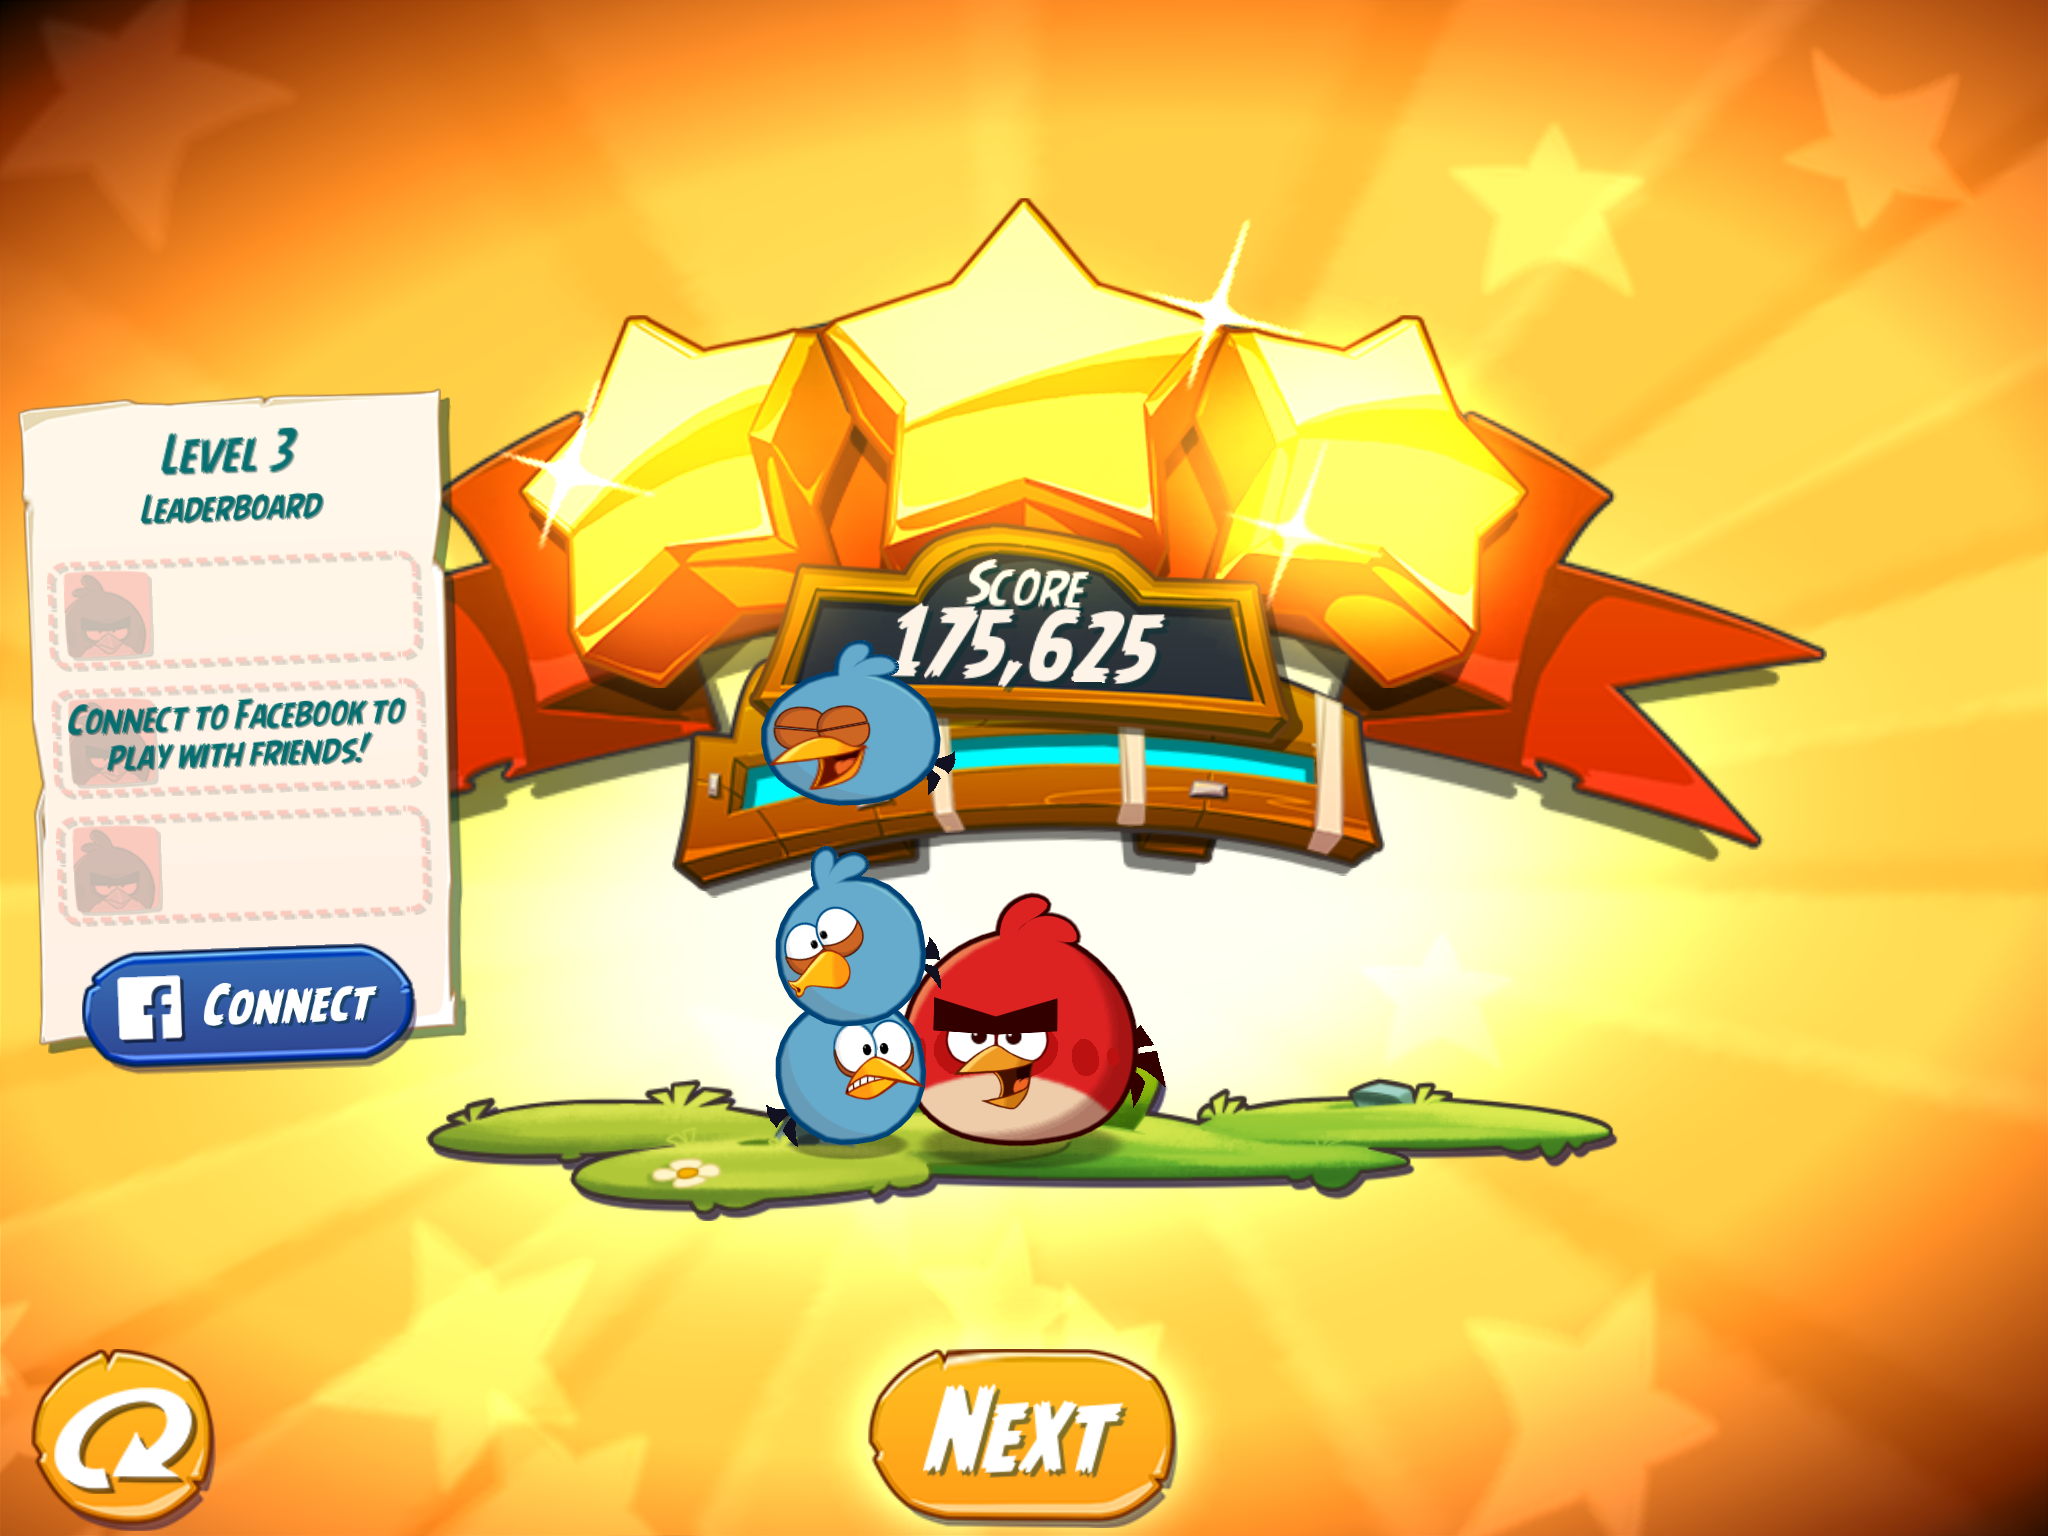 Angry Birds 2: Level 3 175,625 points